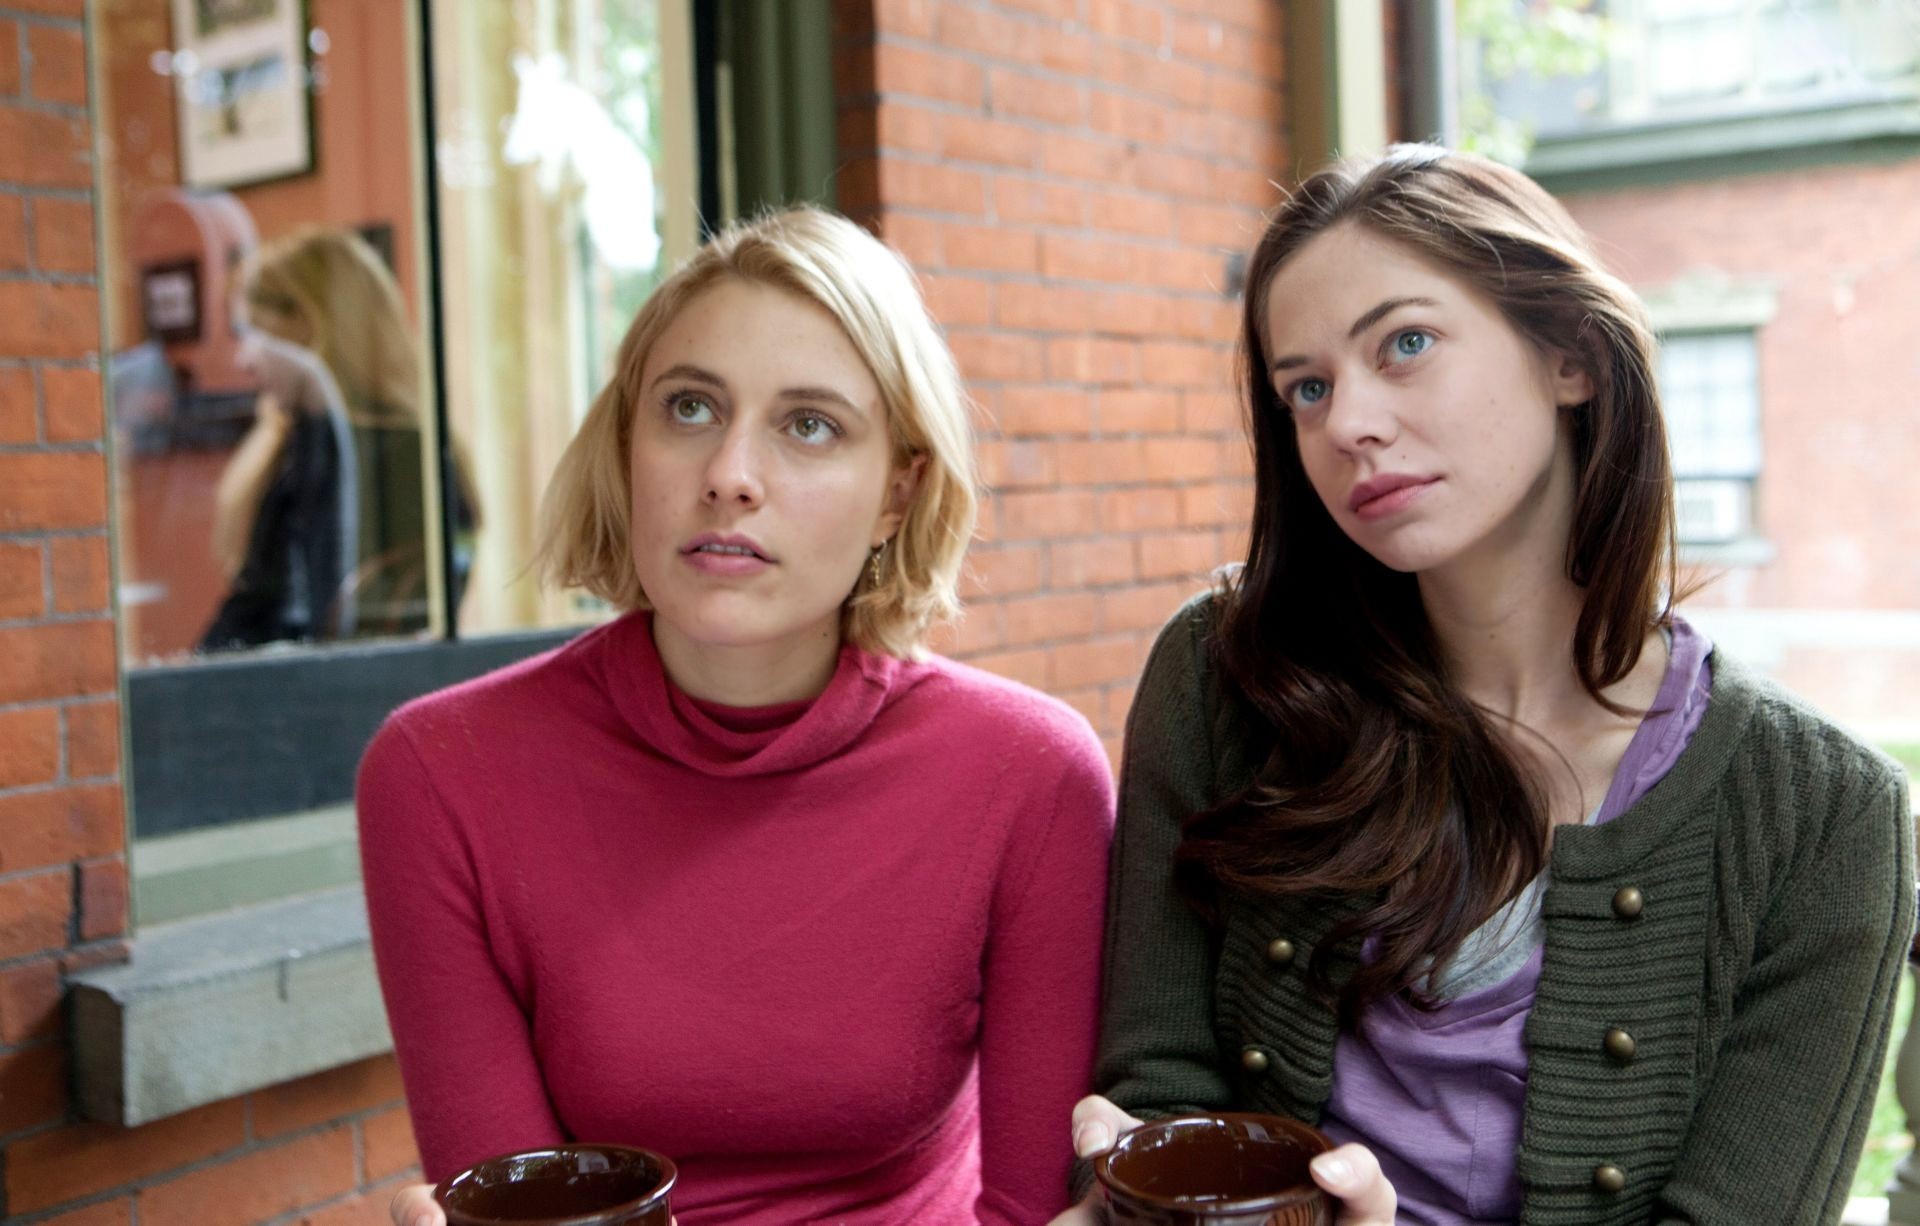 Greta Gerwig stars as Violet and Analeigh Tipton stars as Lily in Sony Pictures Classics' Damsels in Distress (2012). Photo credit by Kerry Brown.